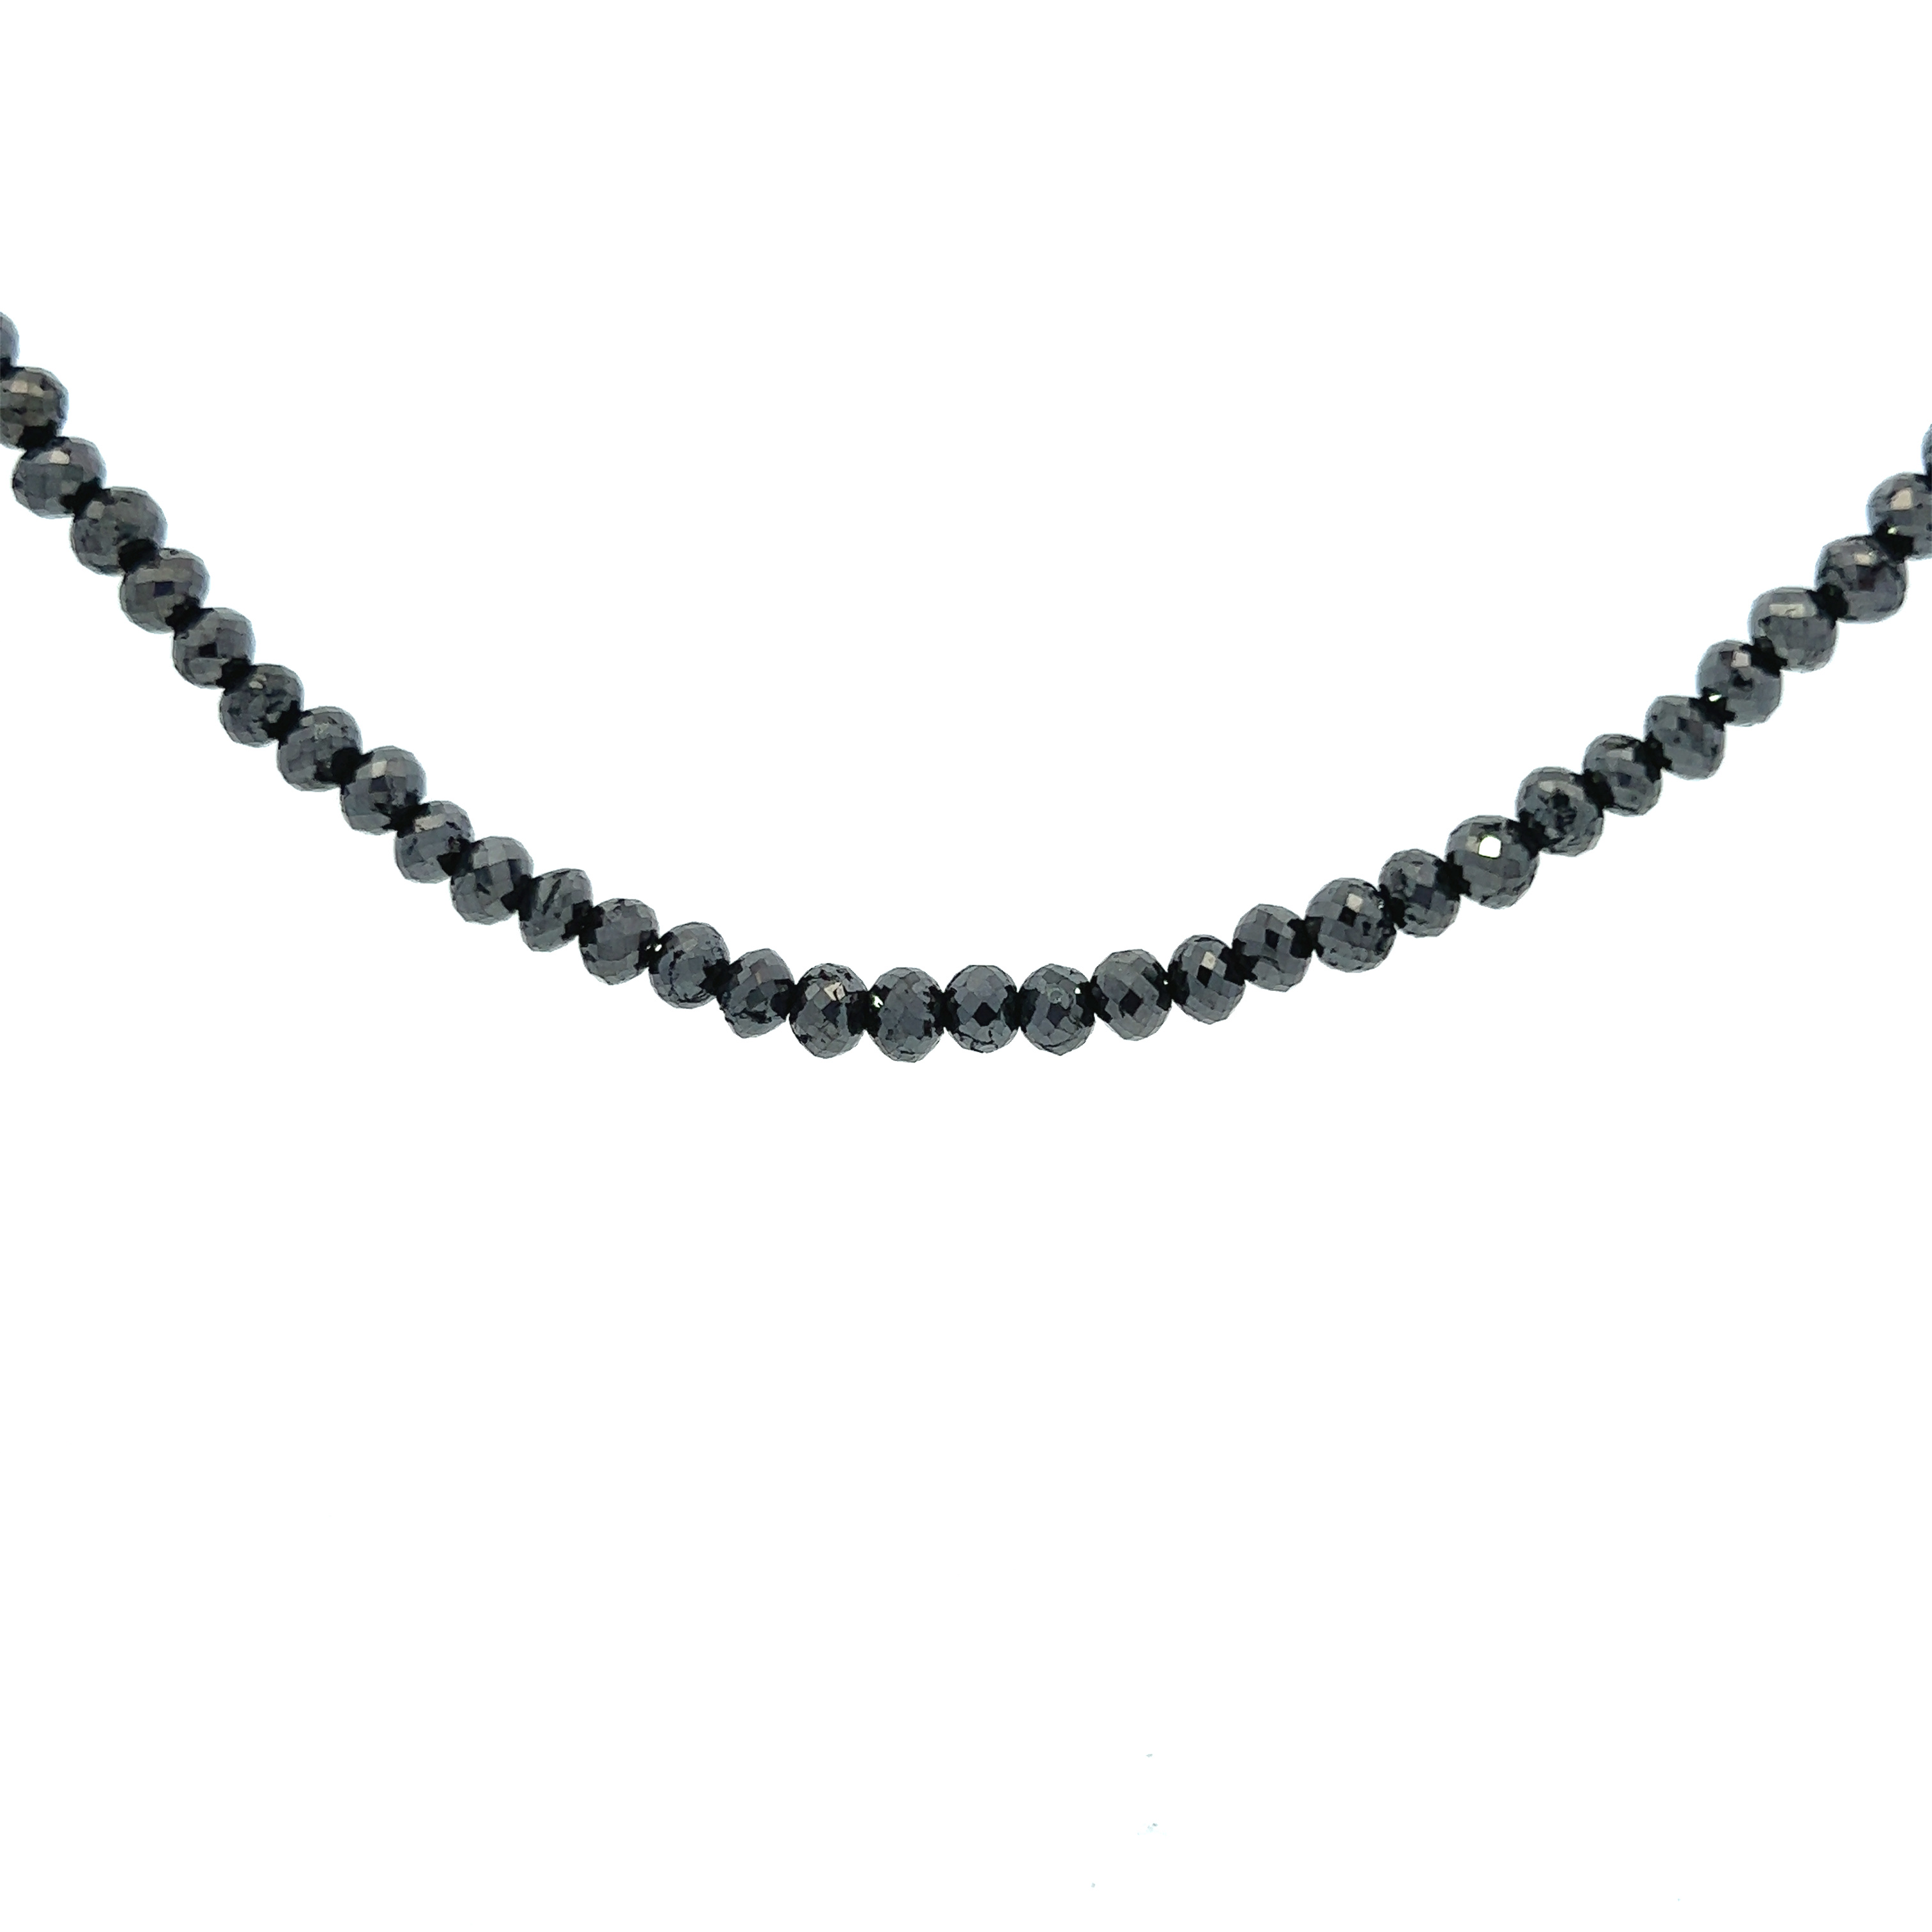 Buy Natural Black Diamond Beaded Necklace, 2.75-3mm Black Diamond Faceted  Rondelle Beads Necklace, Black Diamond Necklace Jewelry, Gift for Her  Online in India - Etsy